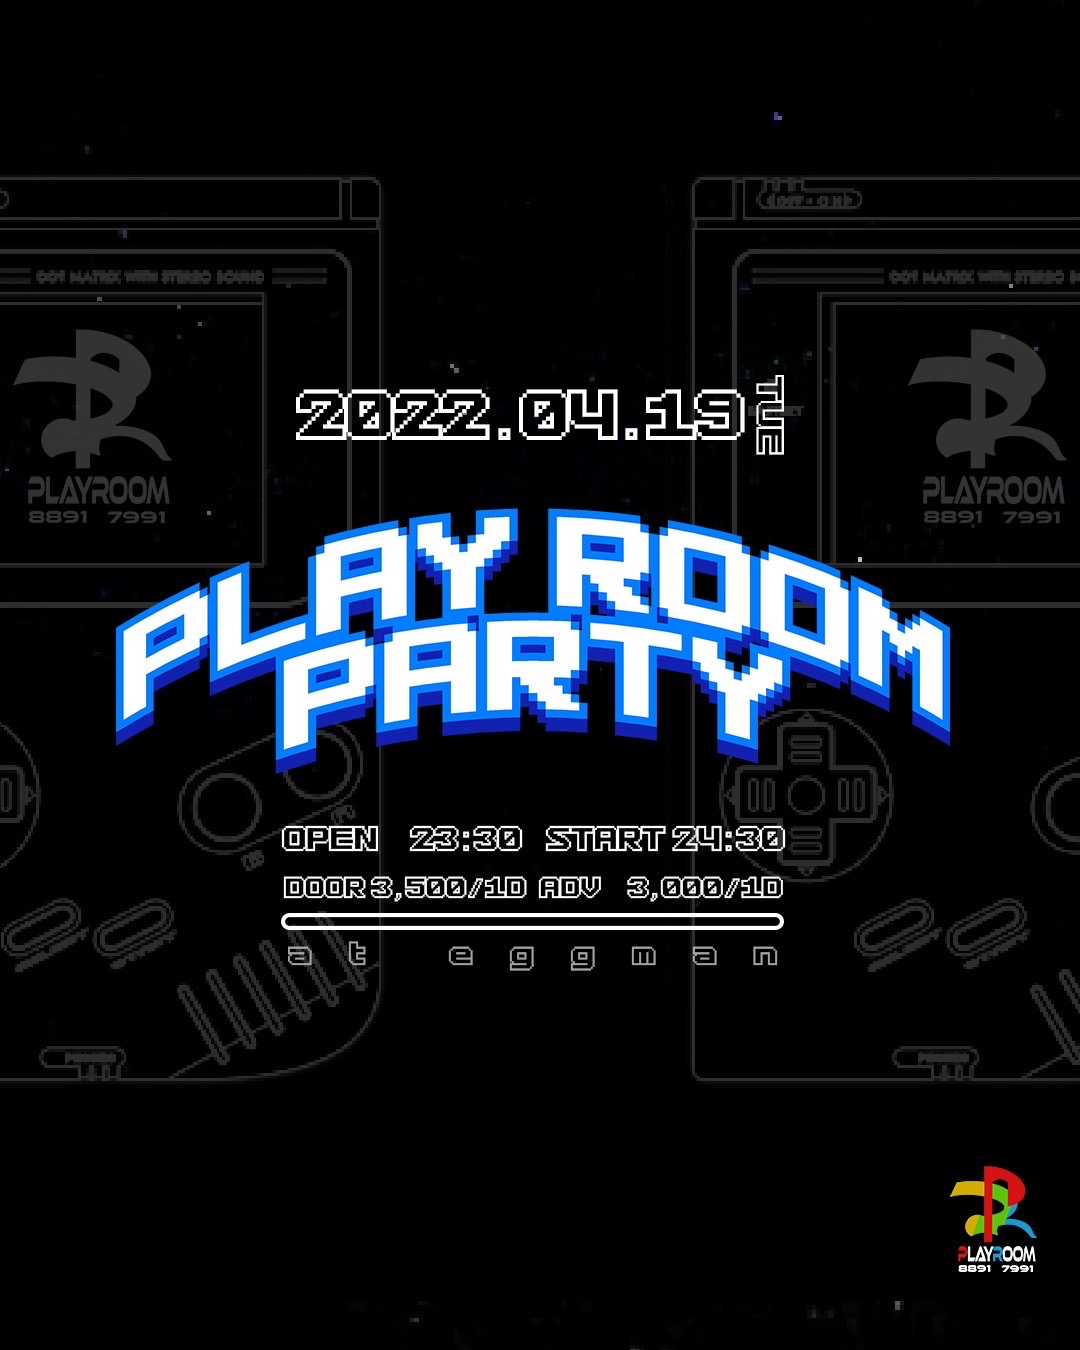 PLAY ROOM PARTY